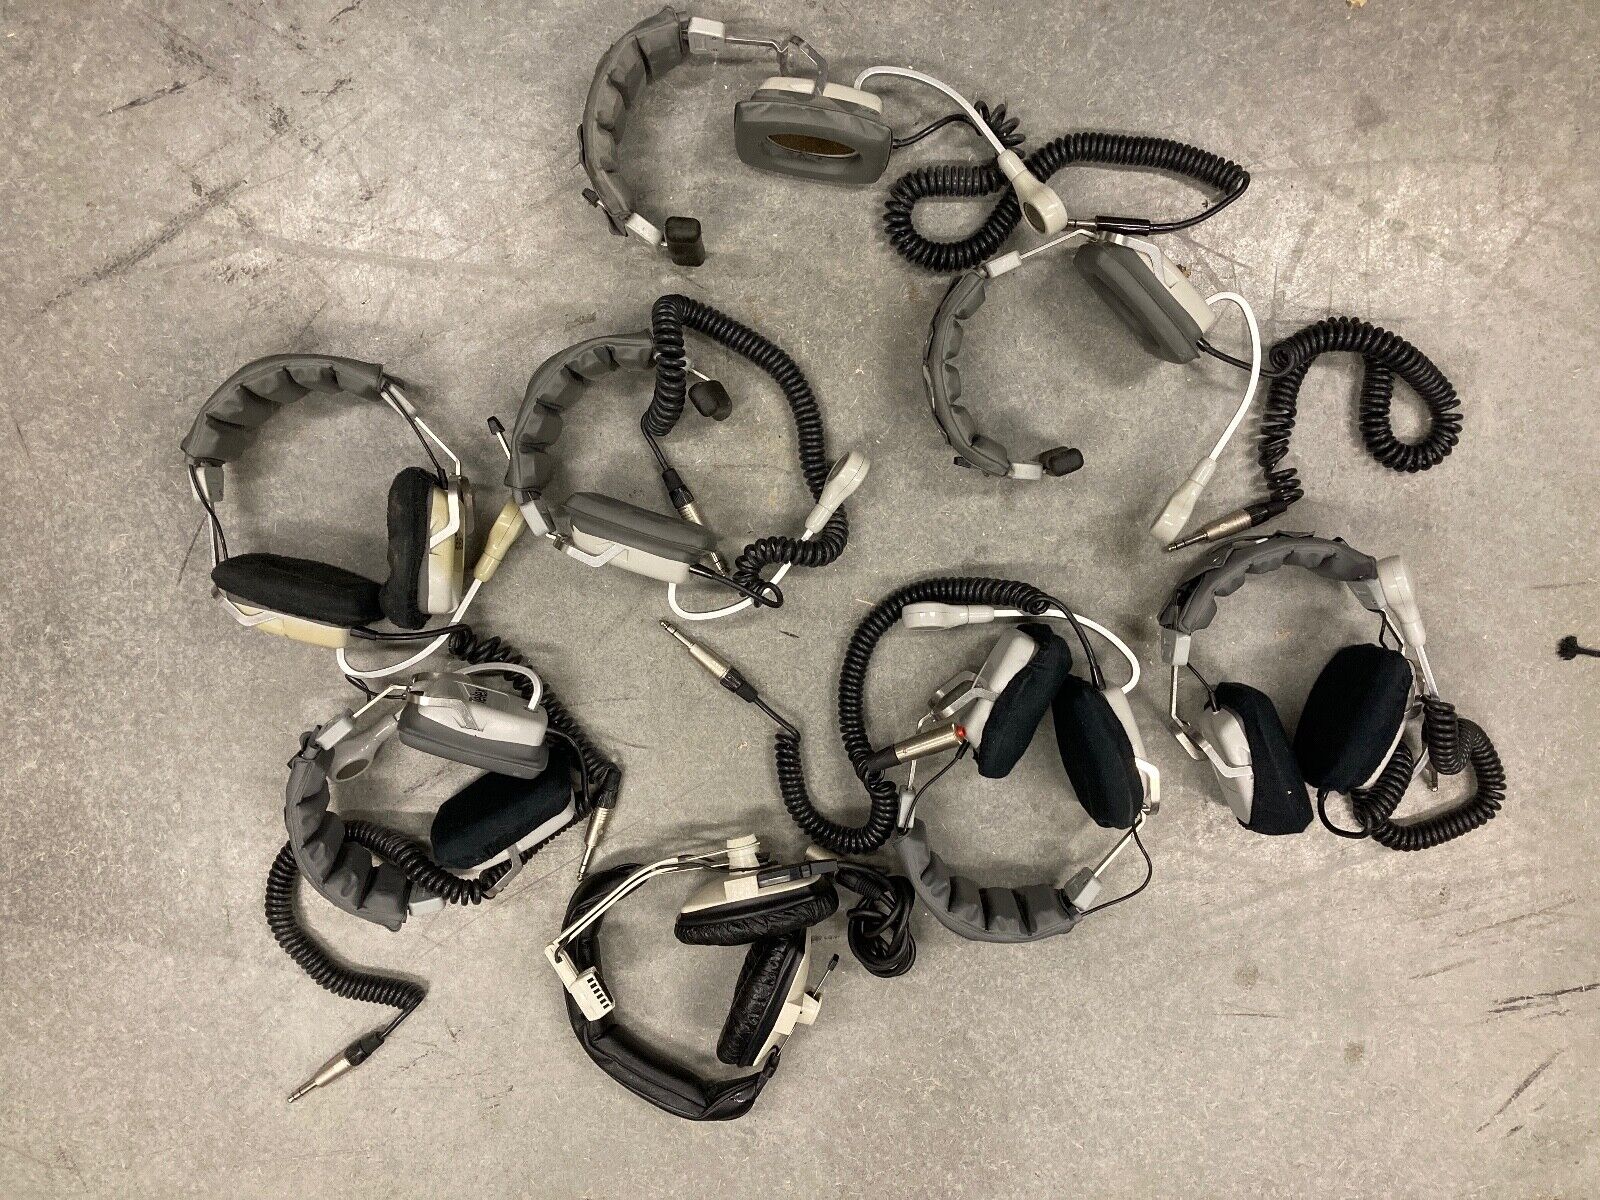  8 Telex  White/Gray Headsets 1/4"  TRS connectors